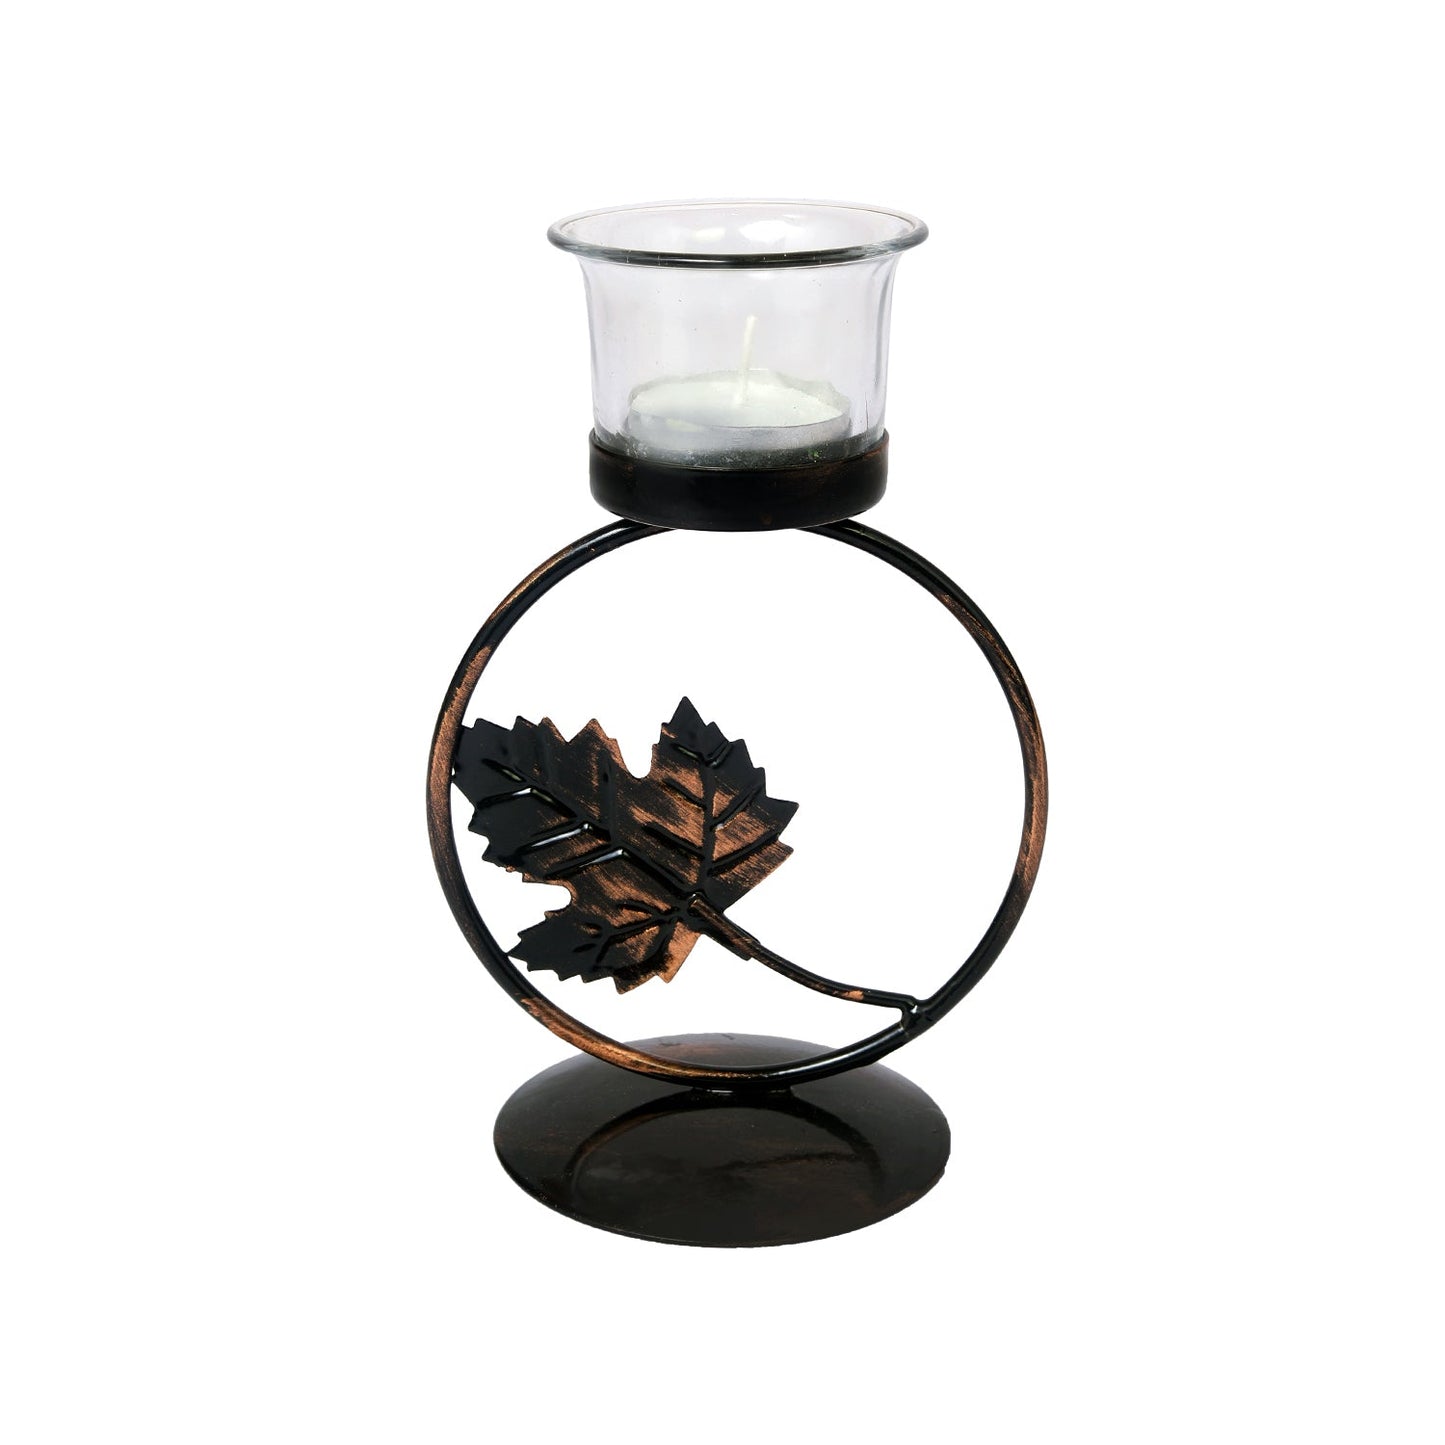 Hosley Metal Black and copper Tealight Candle Holder with Glass for Home Decoration Lightning Gifting, Pack of 1